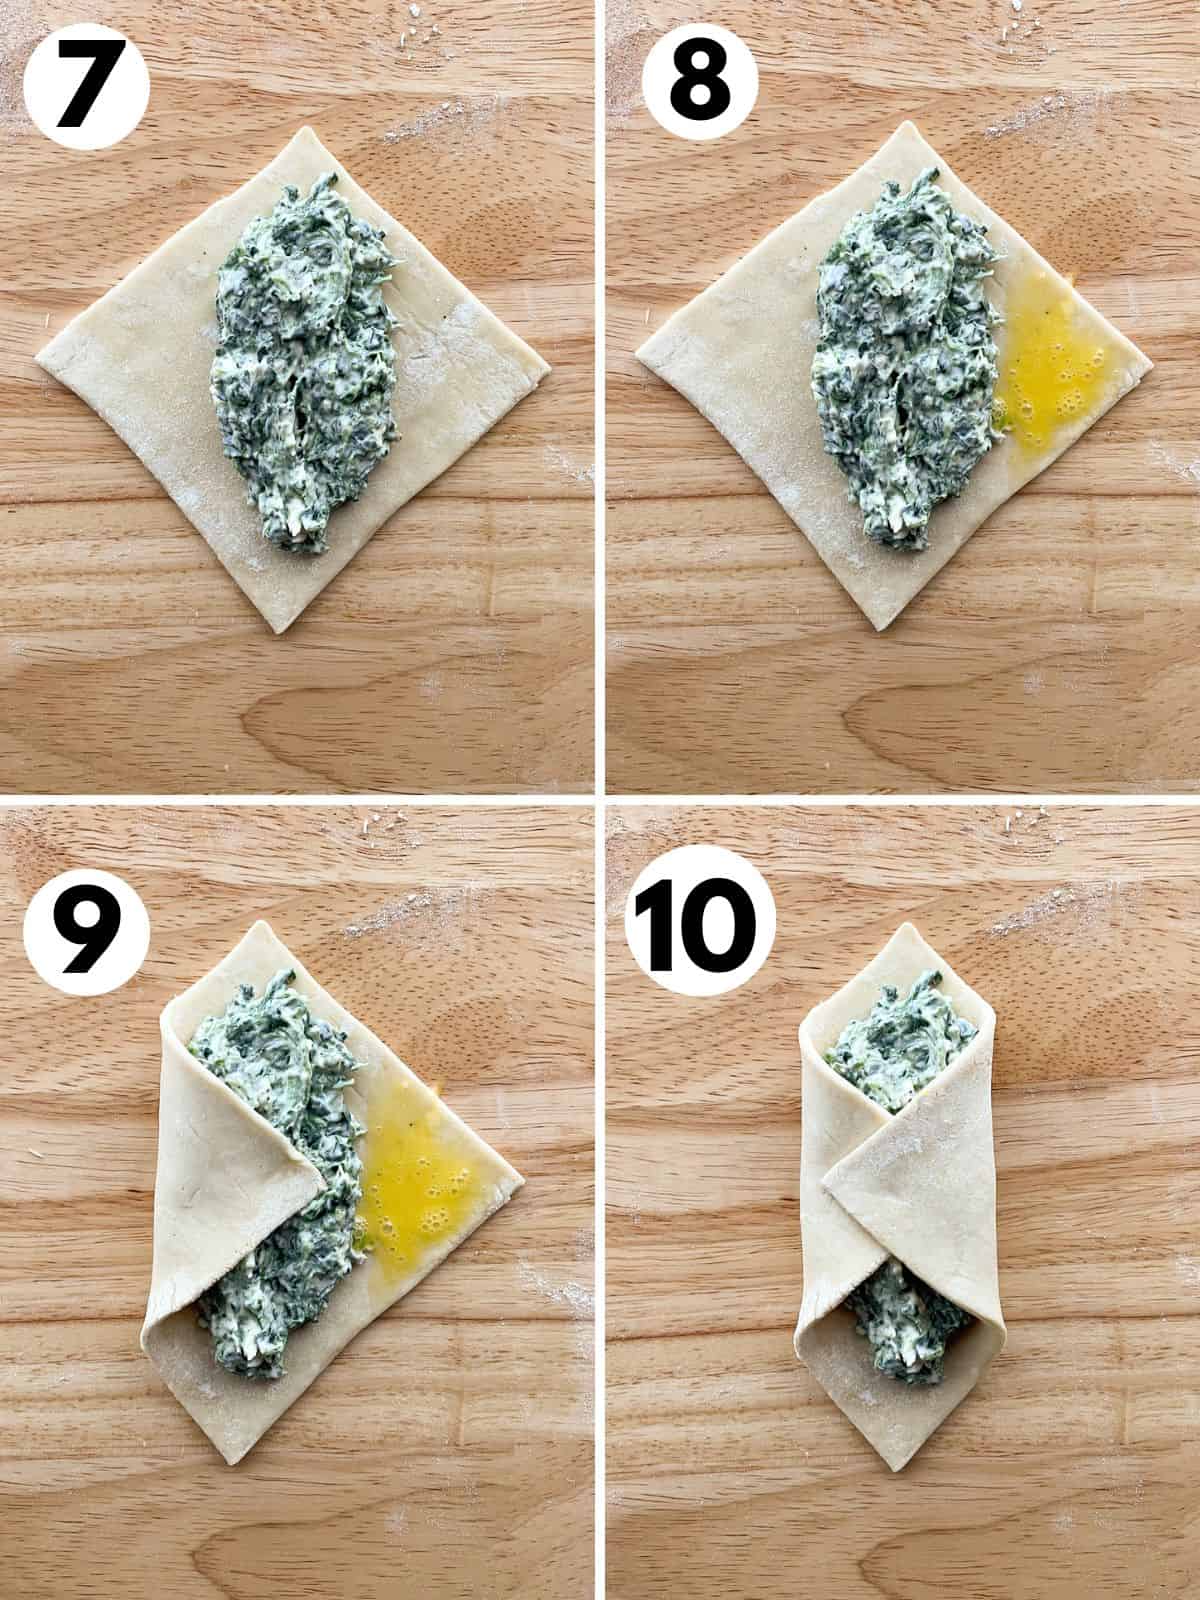 Filling spinach puff pastry. 7. Filling on puff pastry. 8. Egg wash on right edge of pastry. 9. Folding pastry over filling. 10. Two edges of filling folded over pastry.